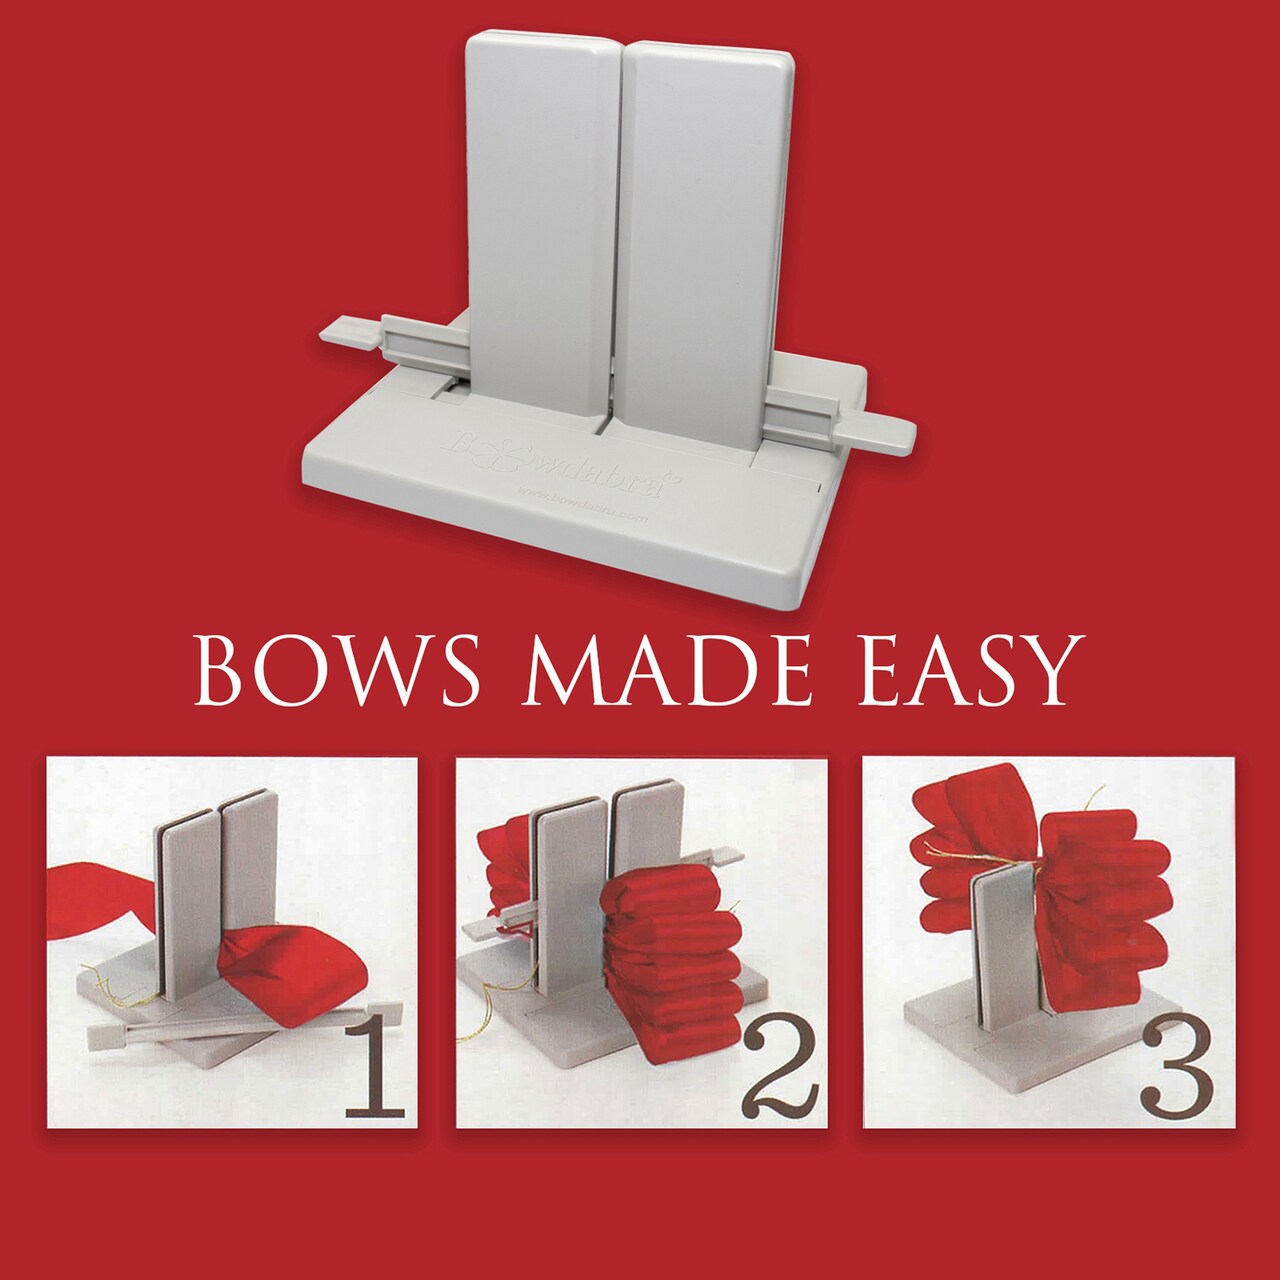 Bowdabra Bow Maker Craft Tool Create Bows Swags Decor Favors Some